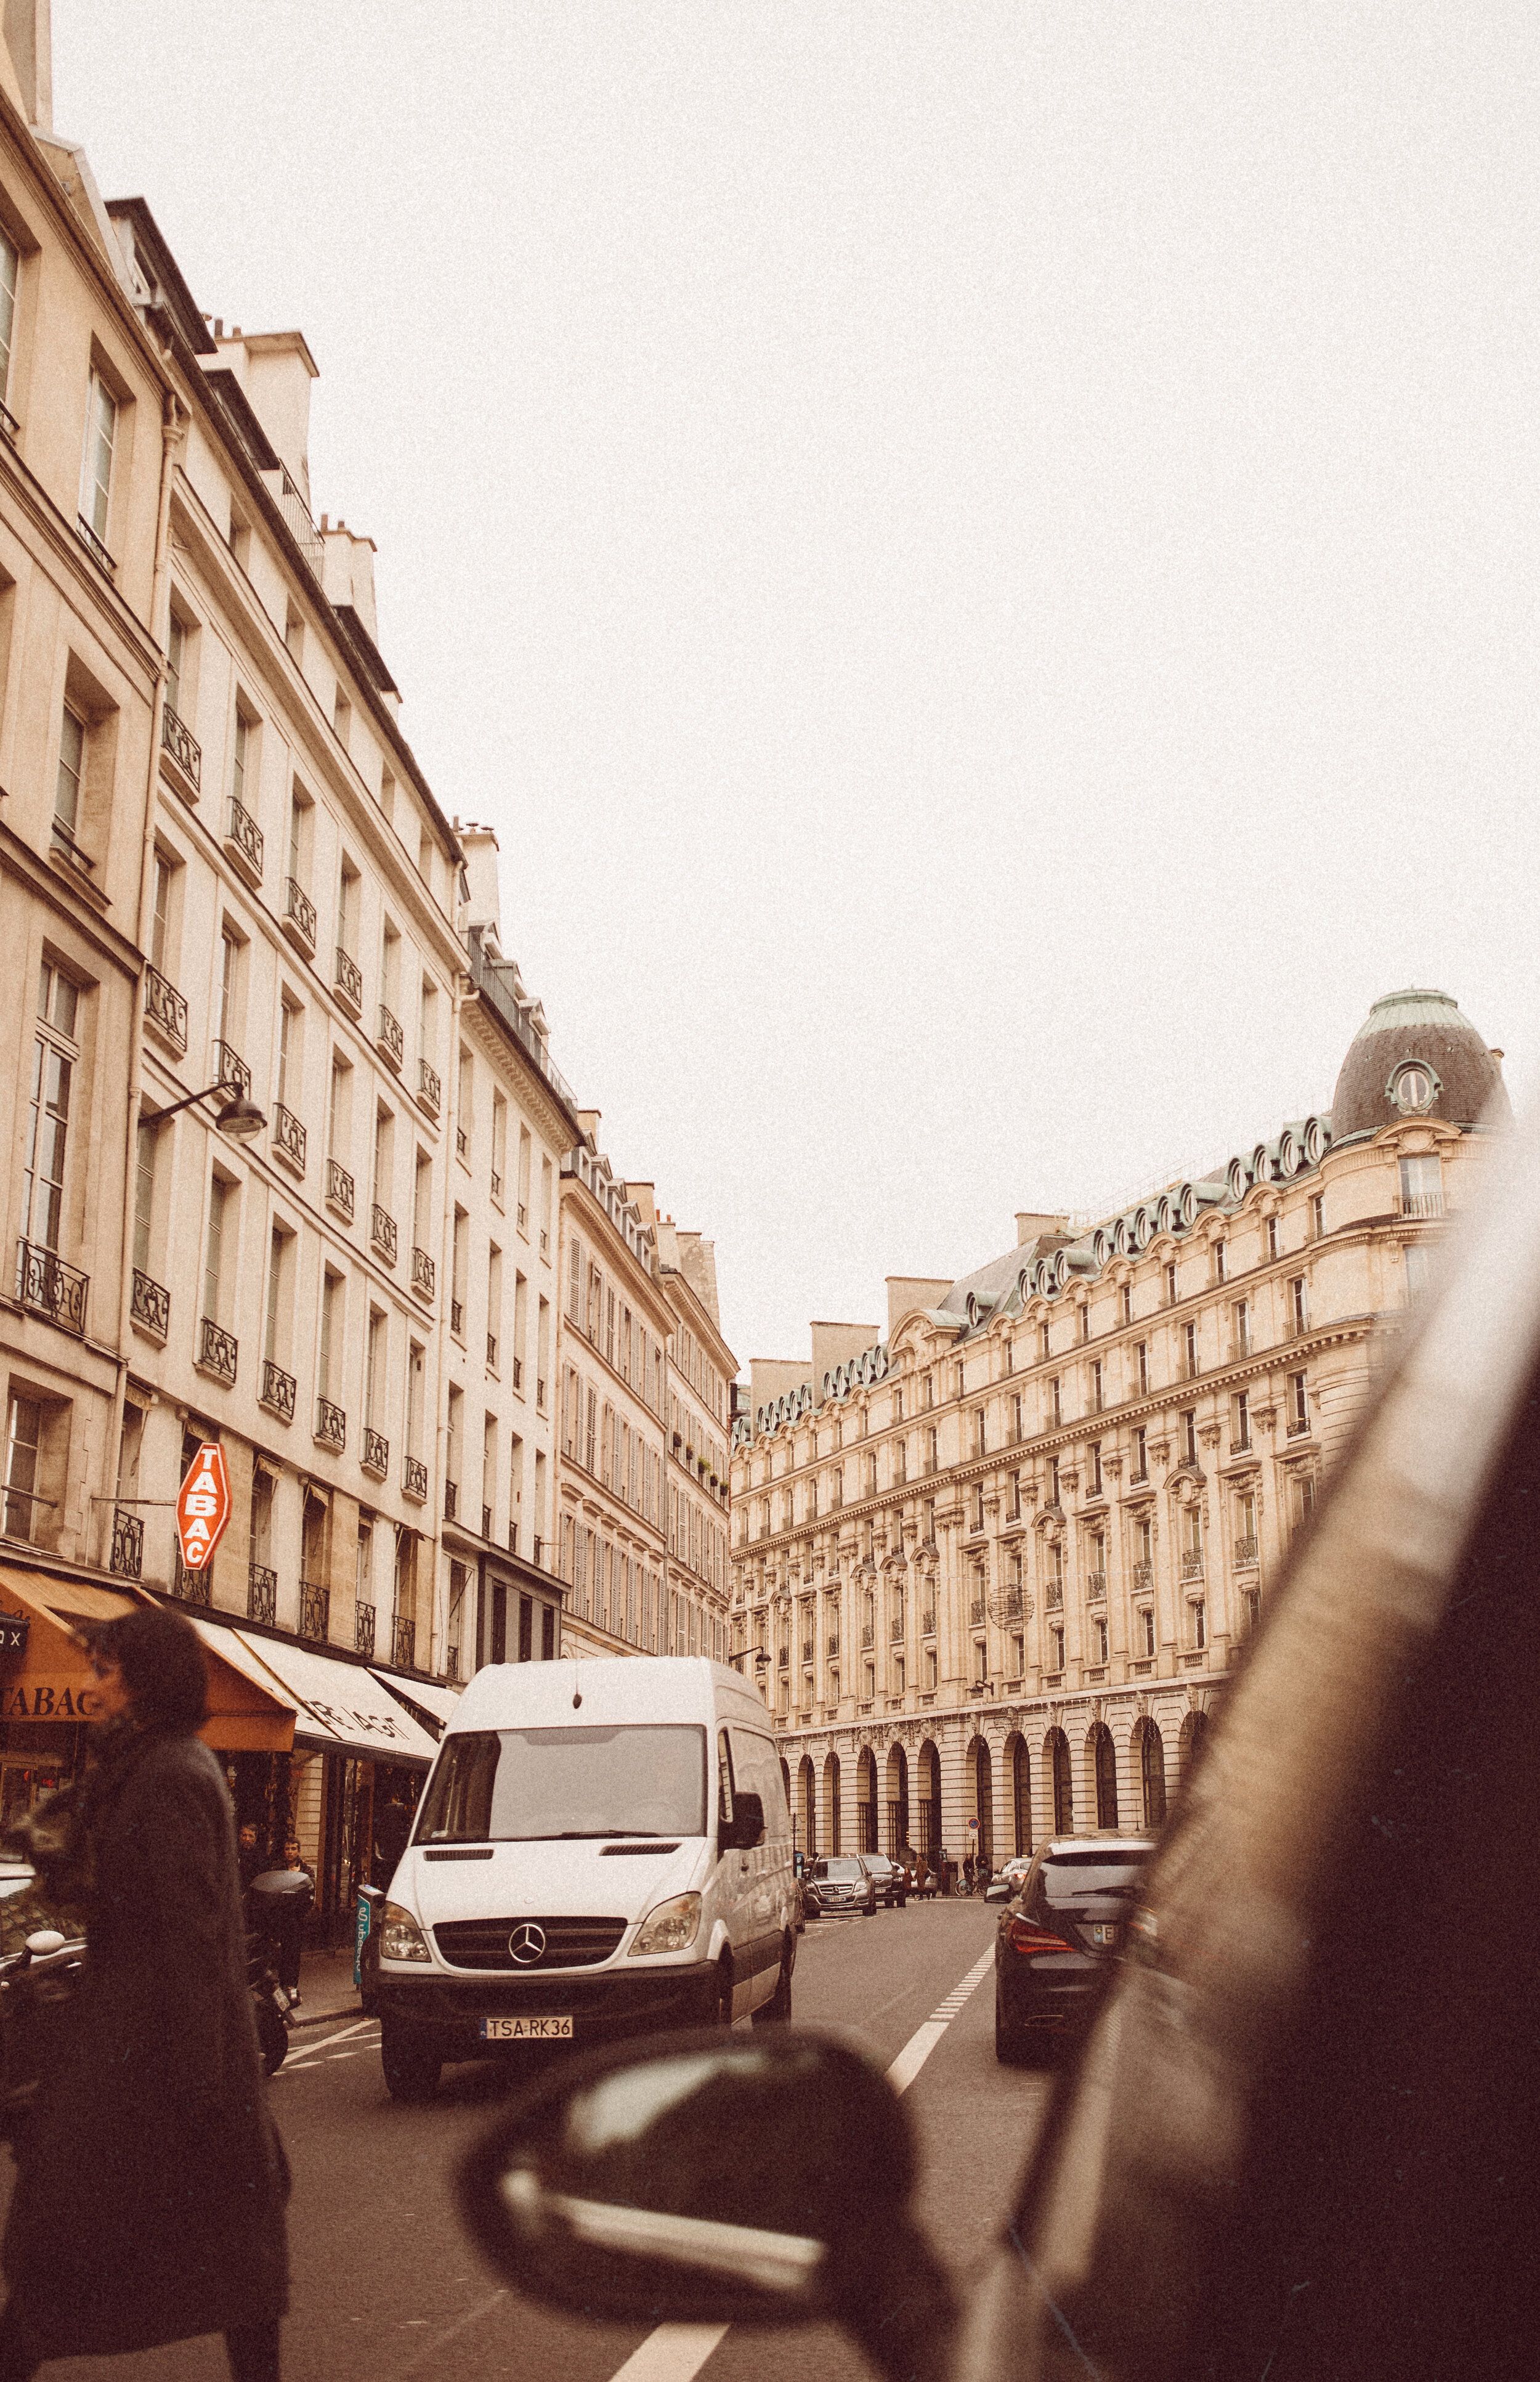 A van driving down a busy city street with buildings on both sides of the street. - Paris